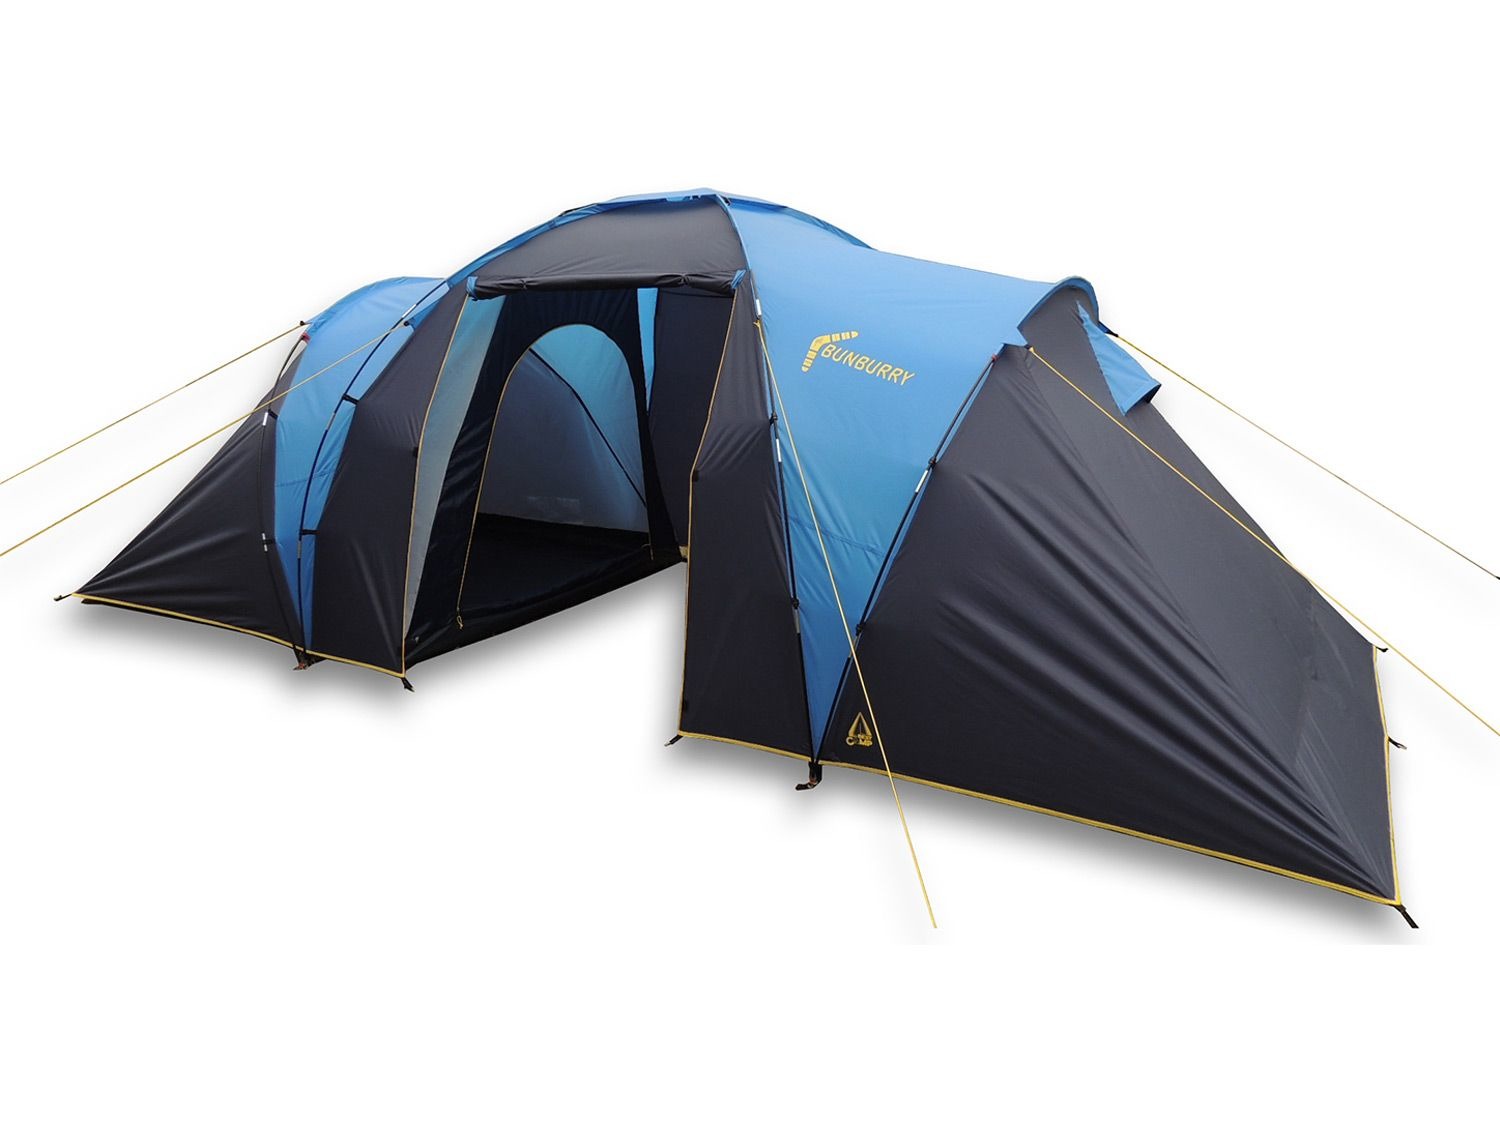 Best Camp 6-persoons tent online |